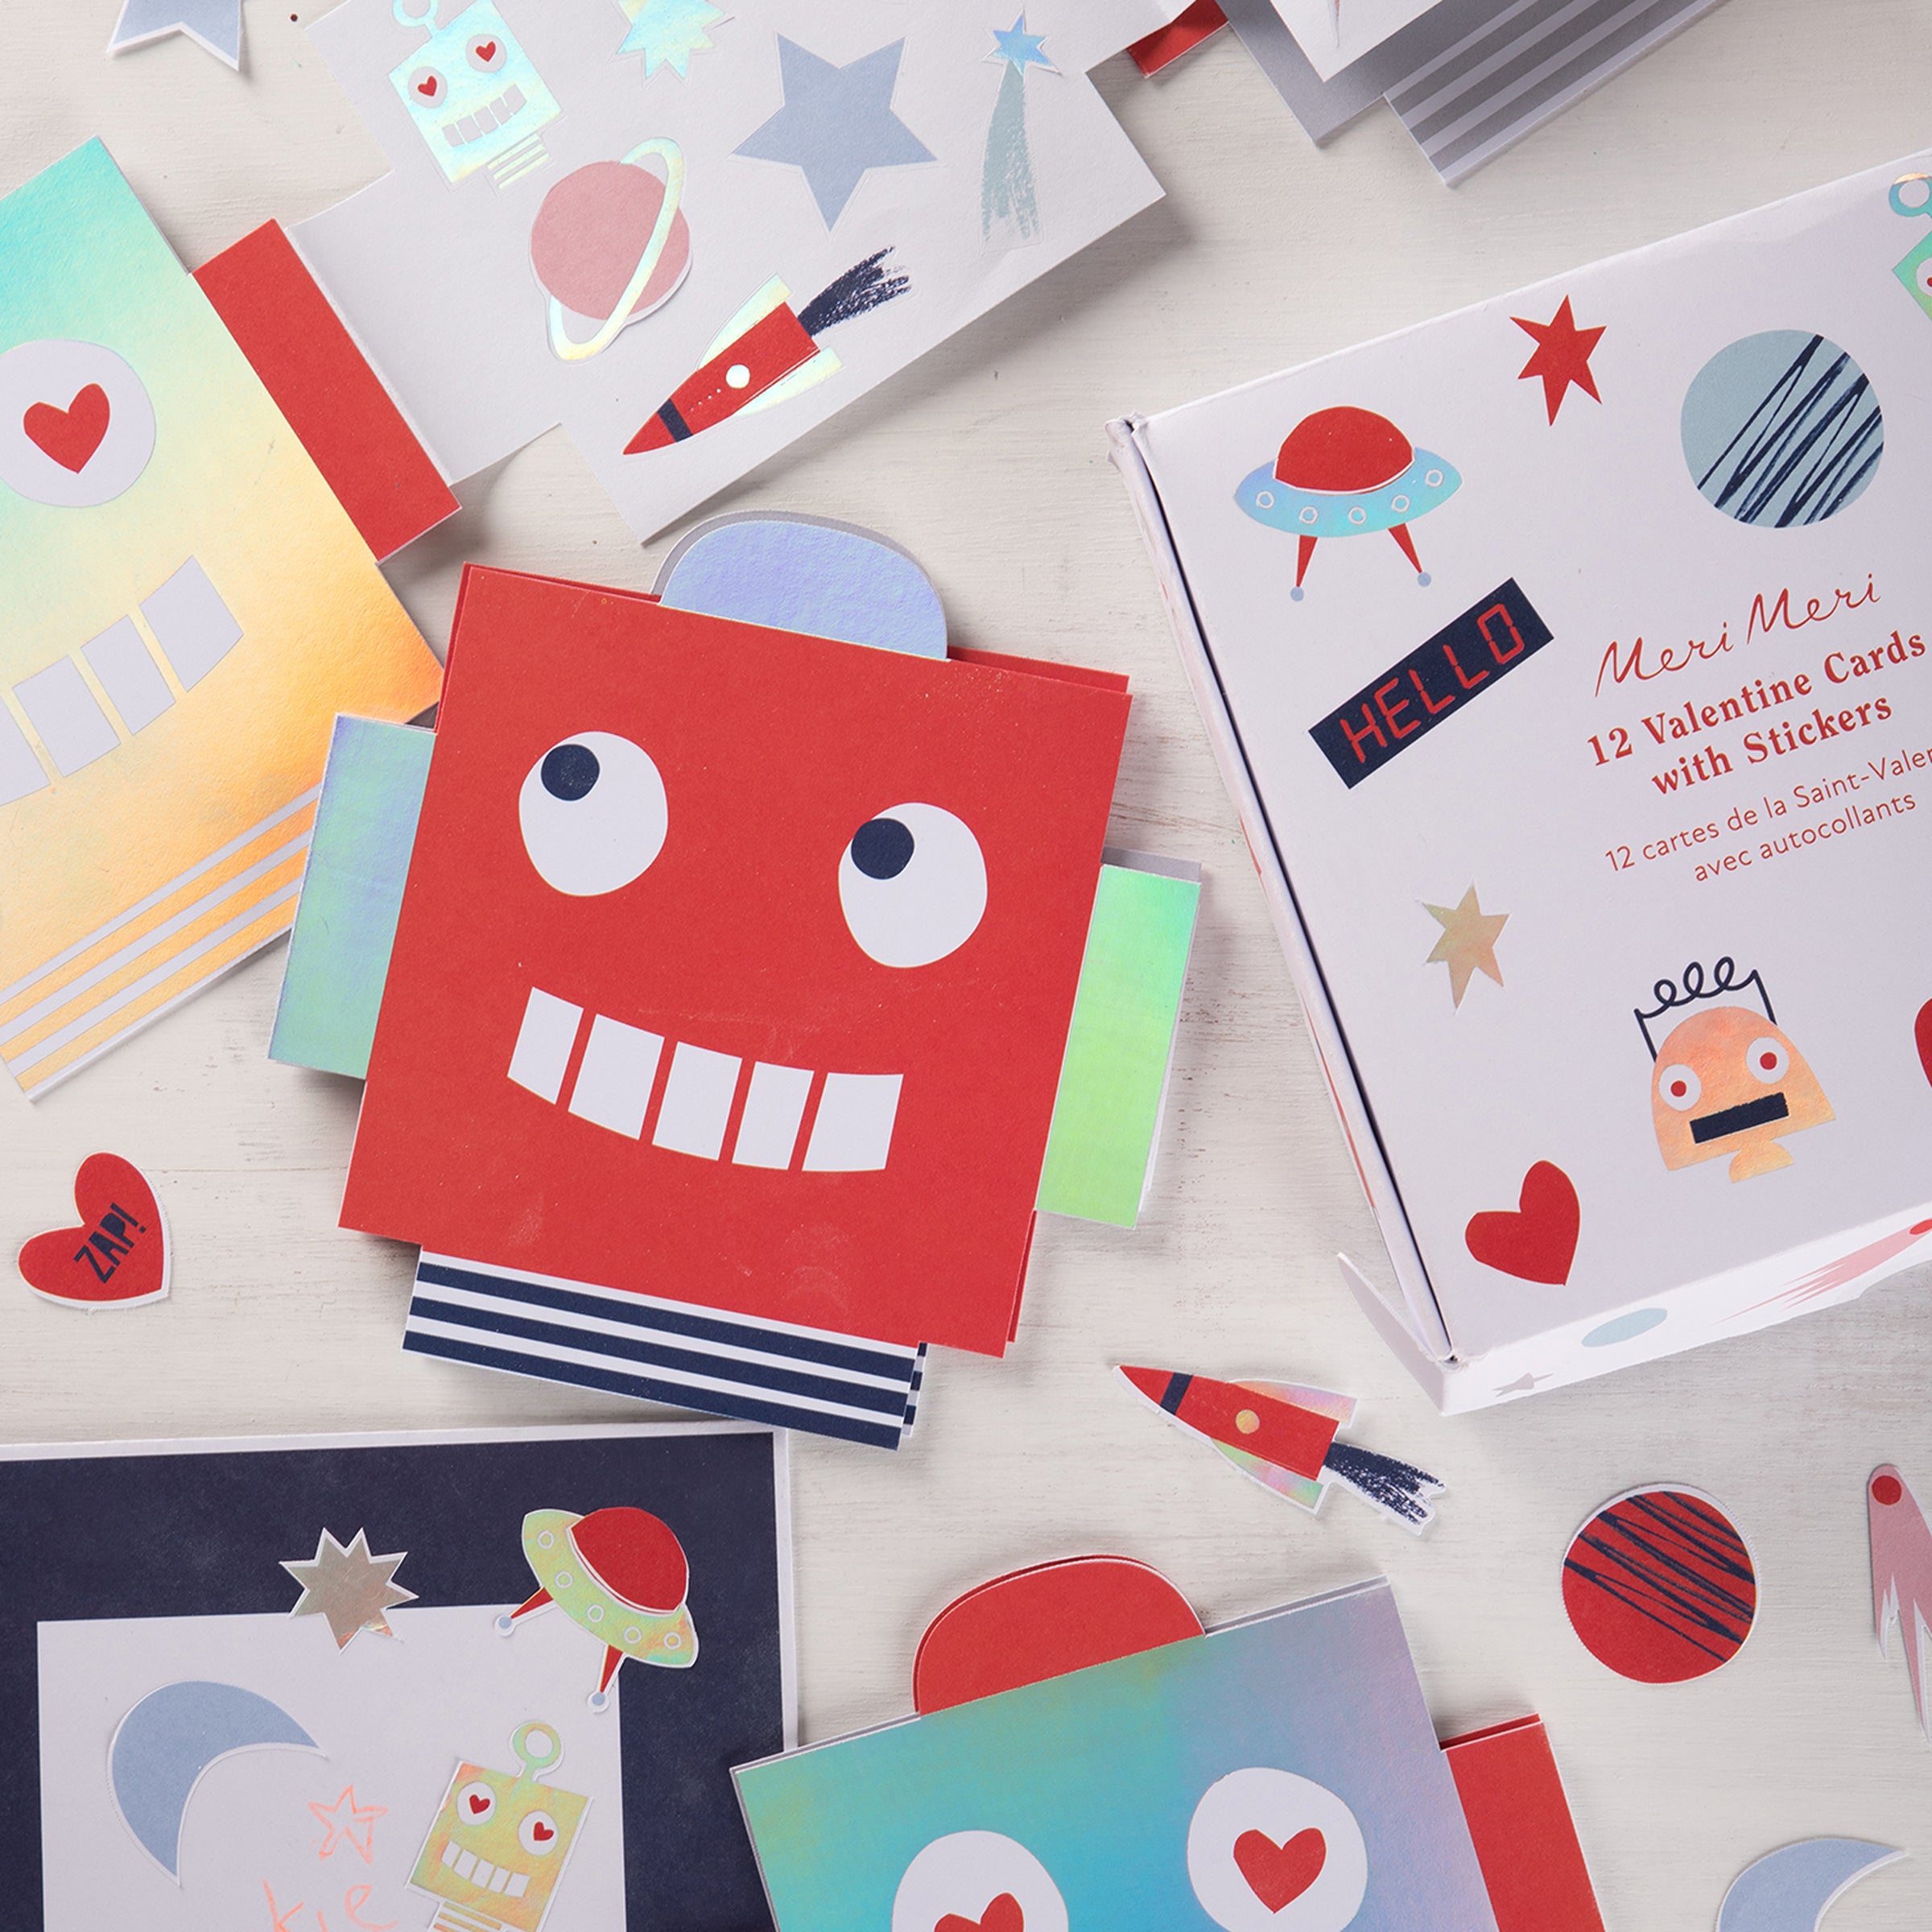 Our kids valentines cards also feature colorful space stickers.